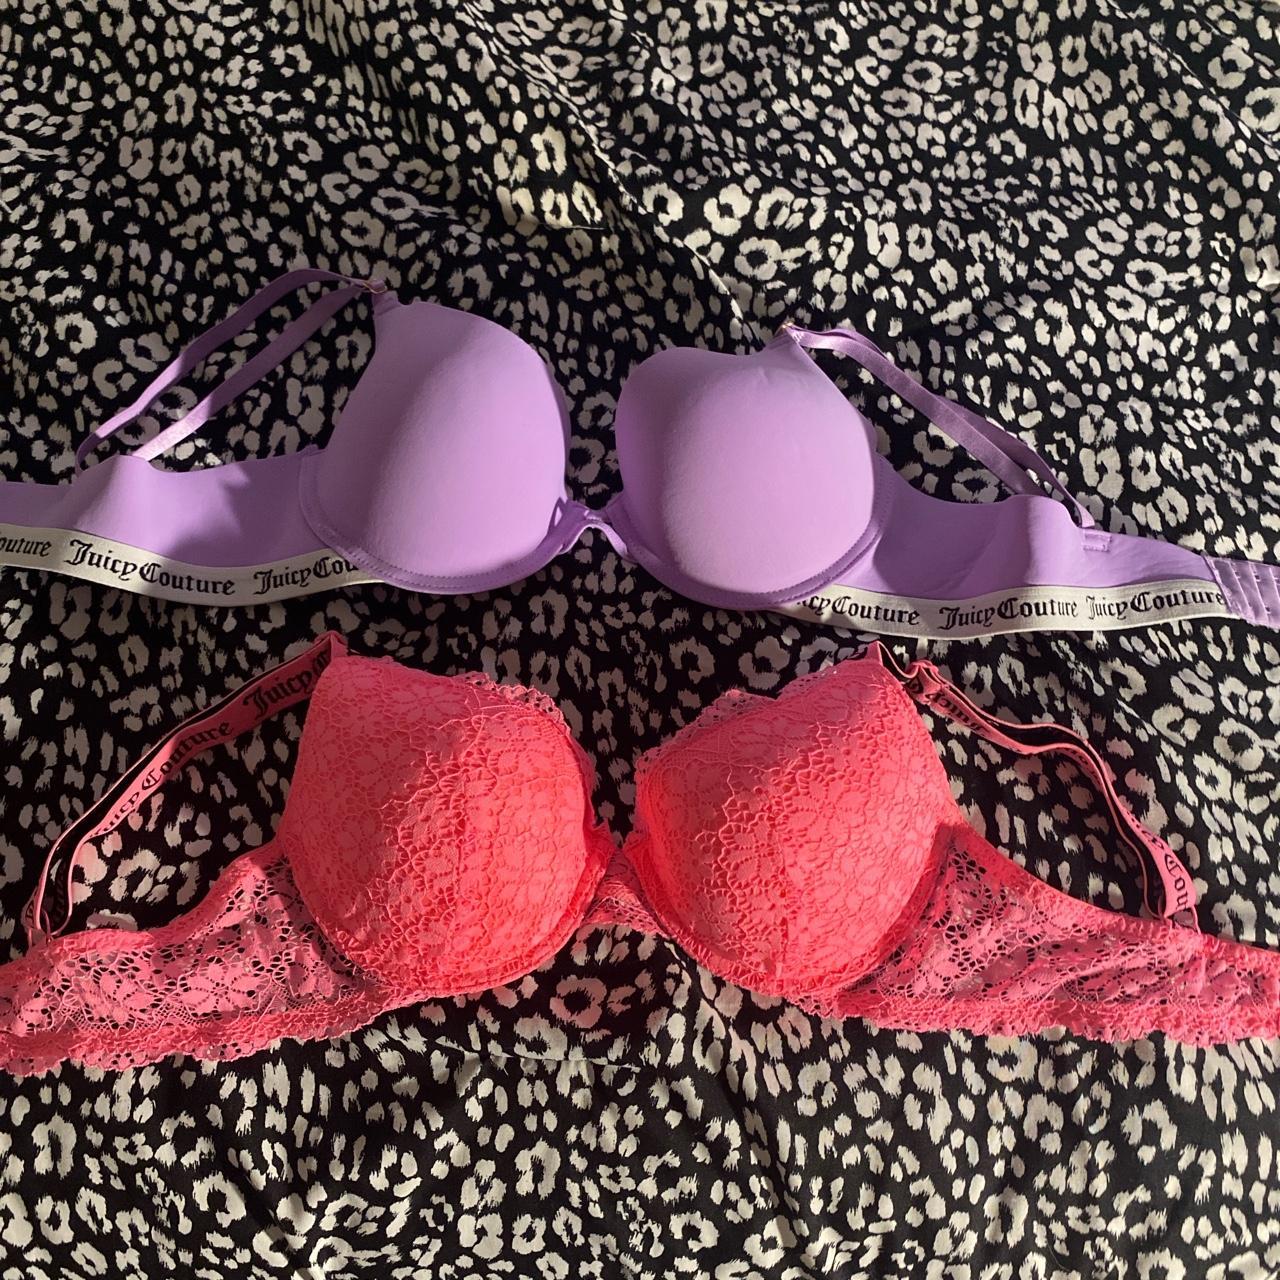 juicy couture bras never worn just not my size - Depop